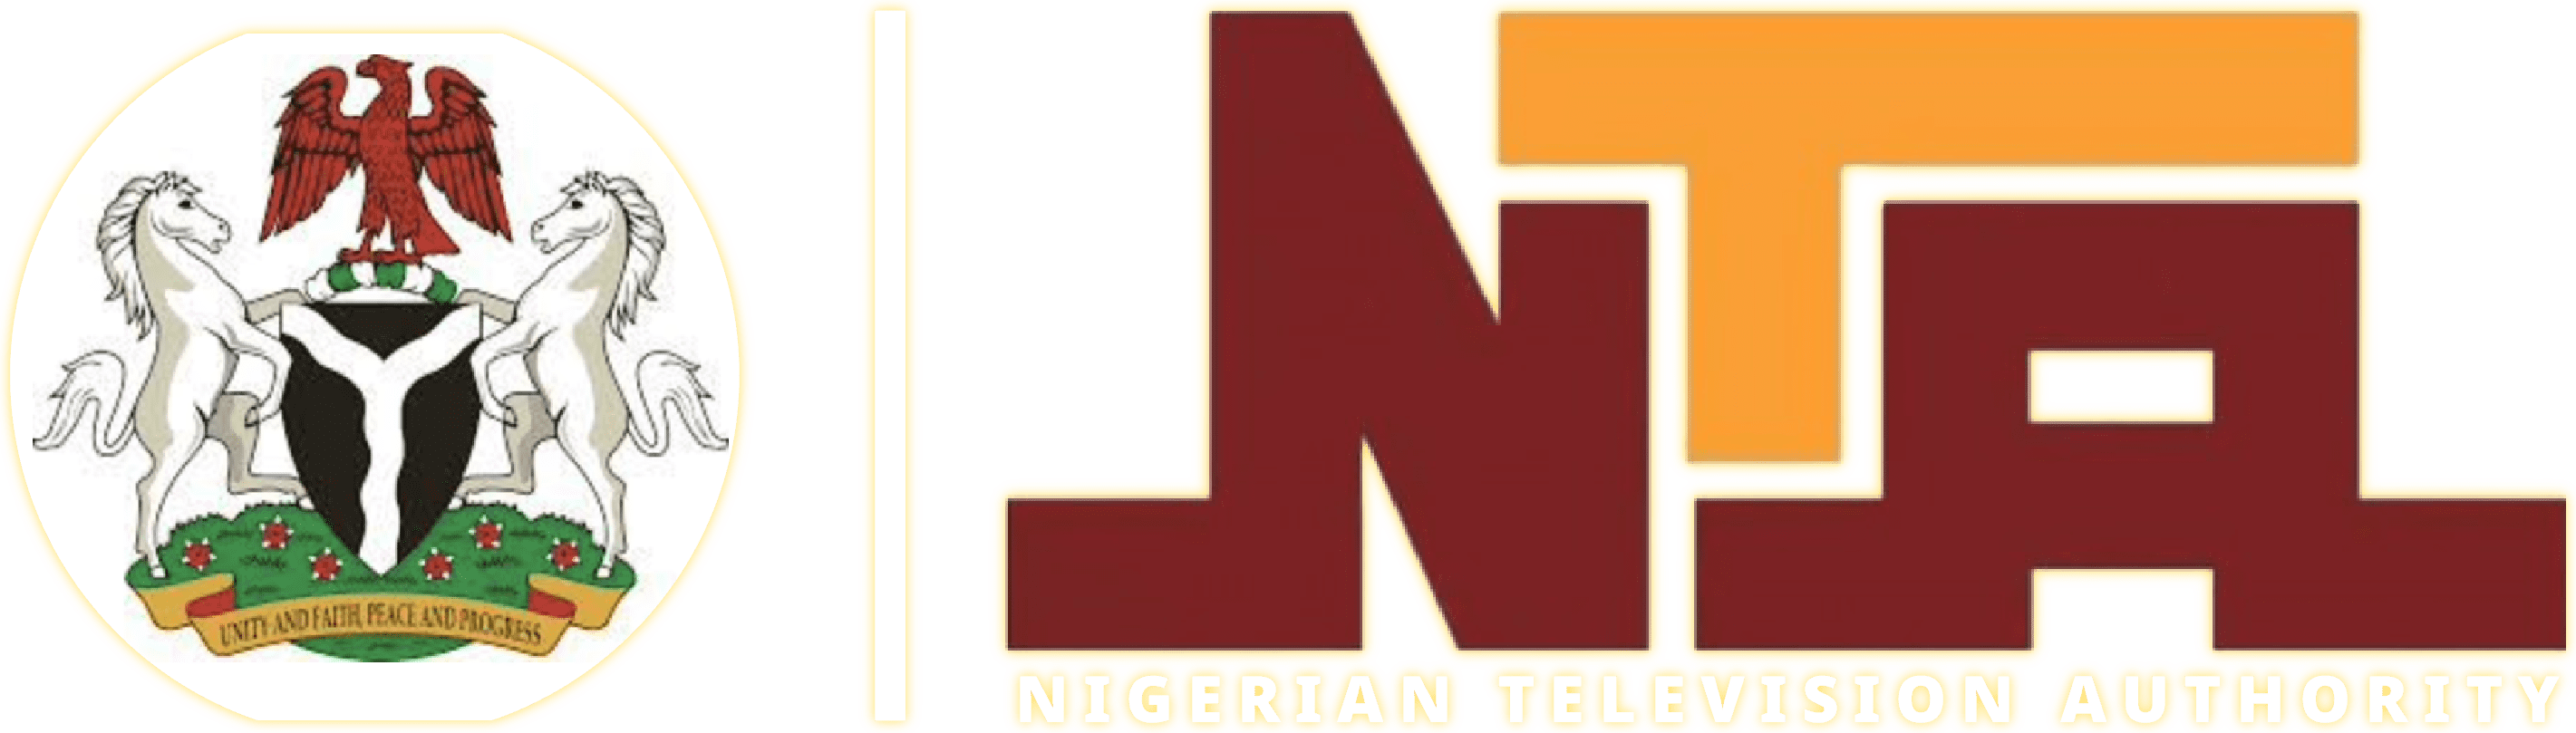 Nigerian Television Authority – Africa's Largest TV Network